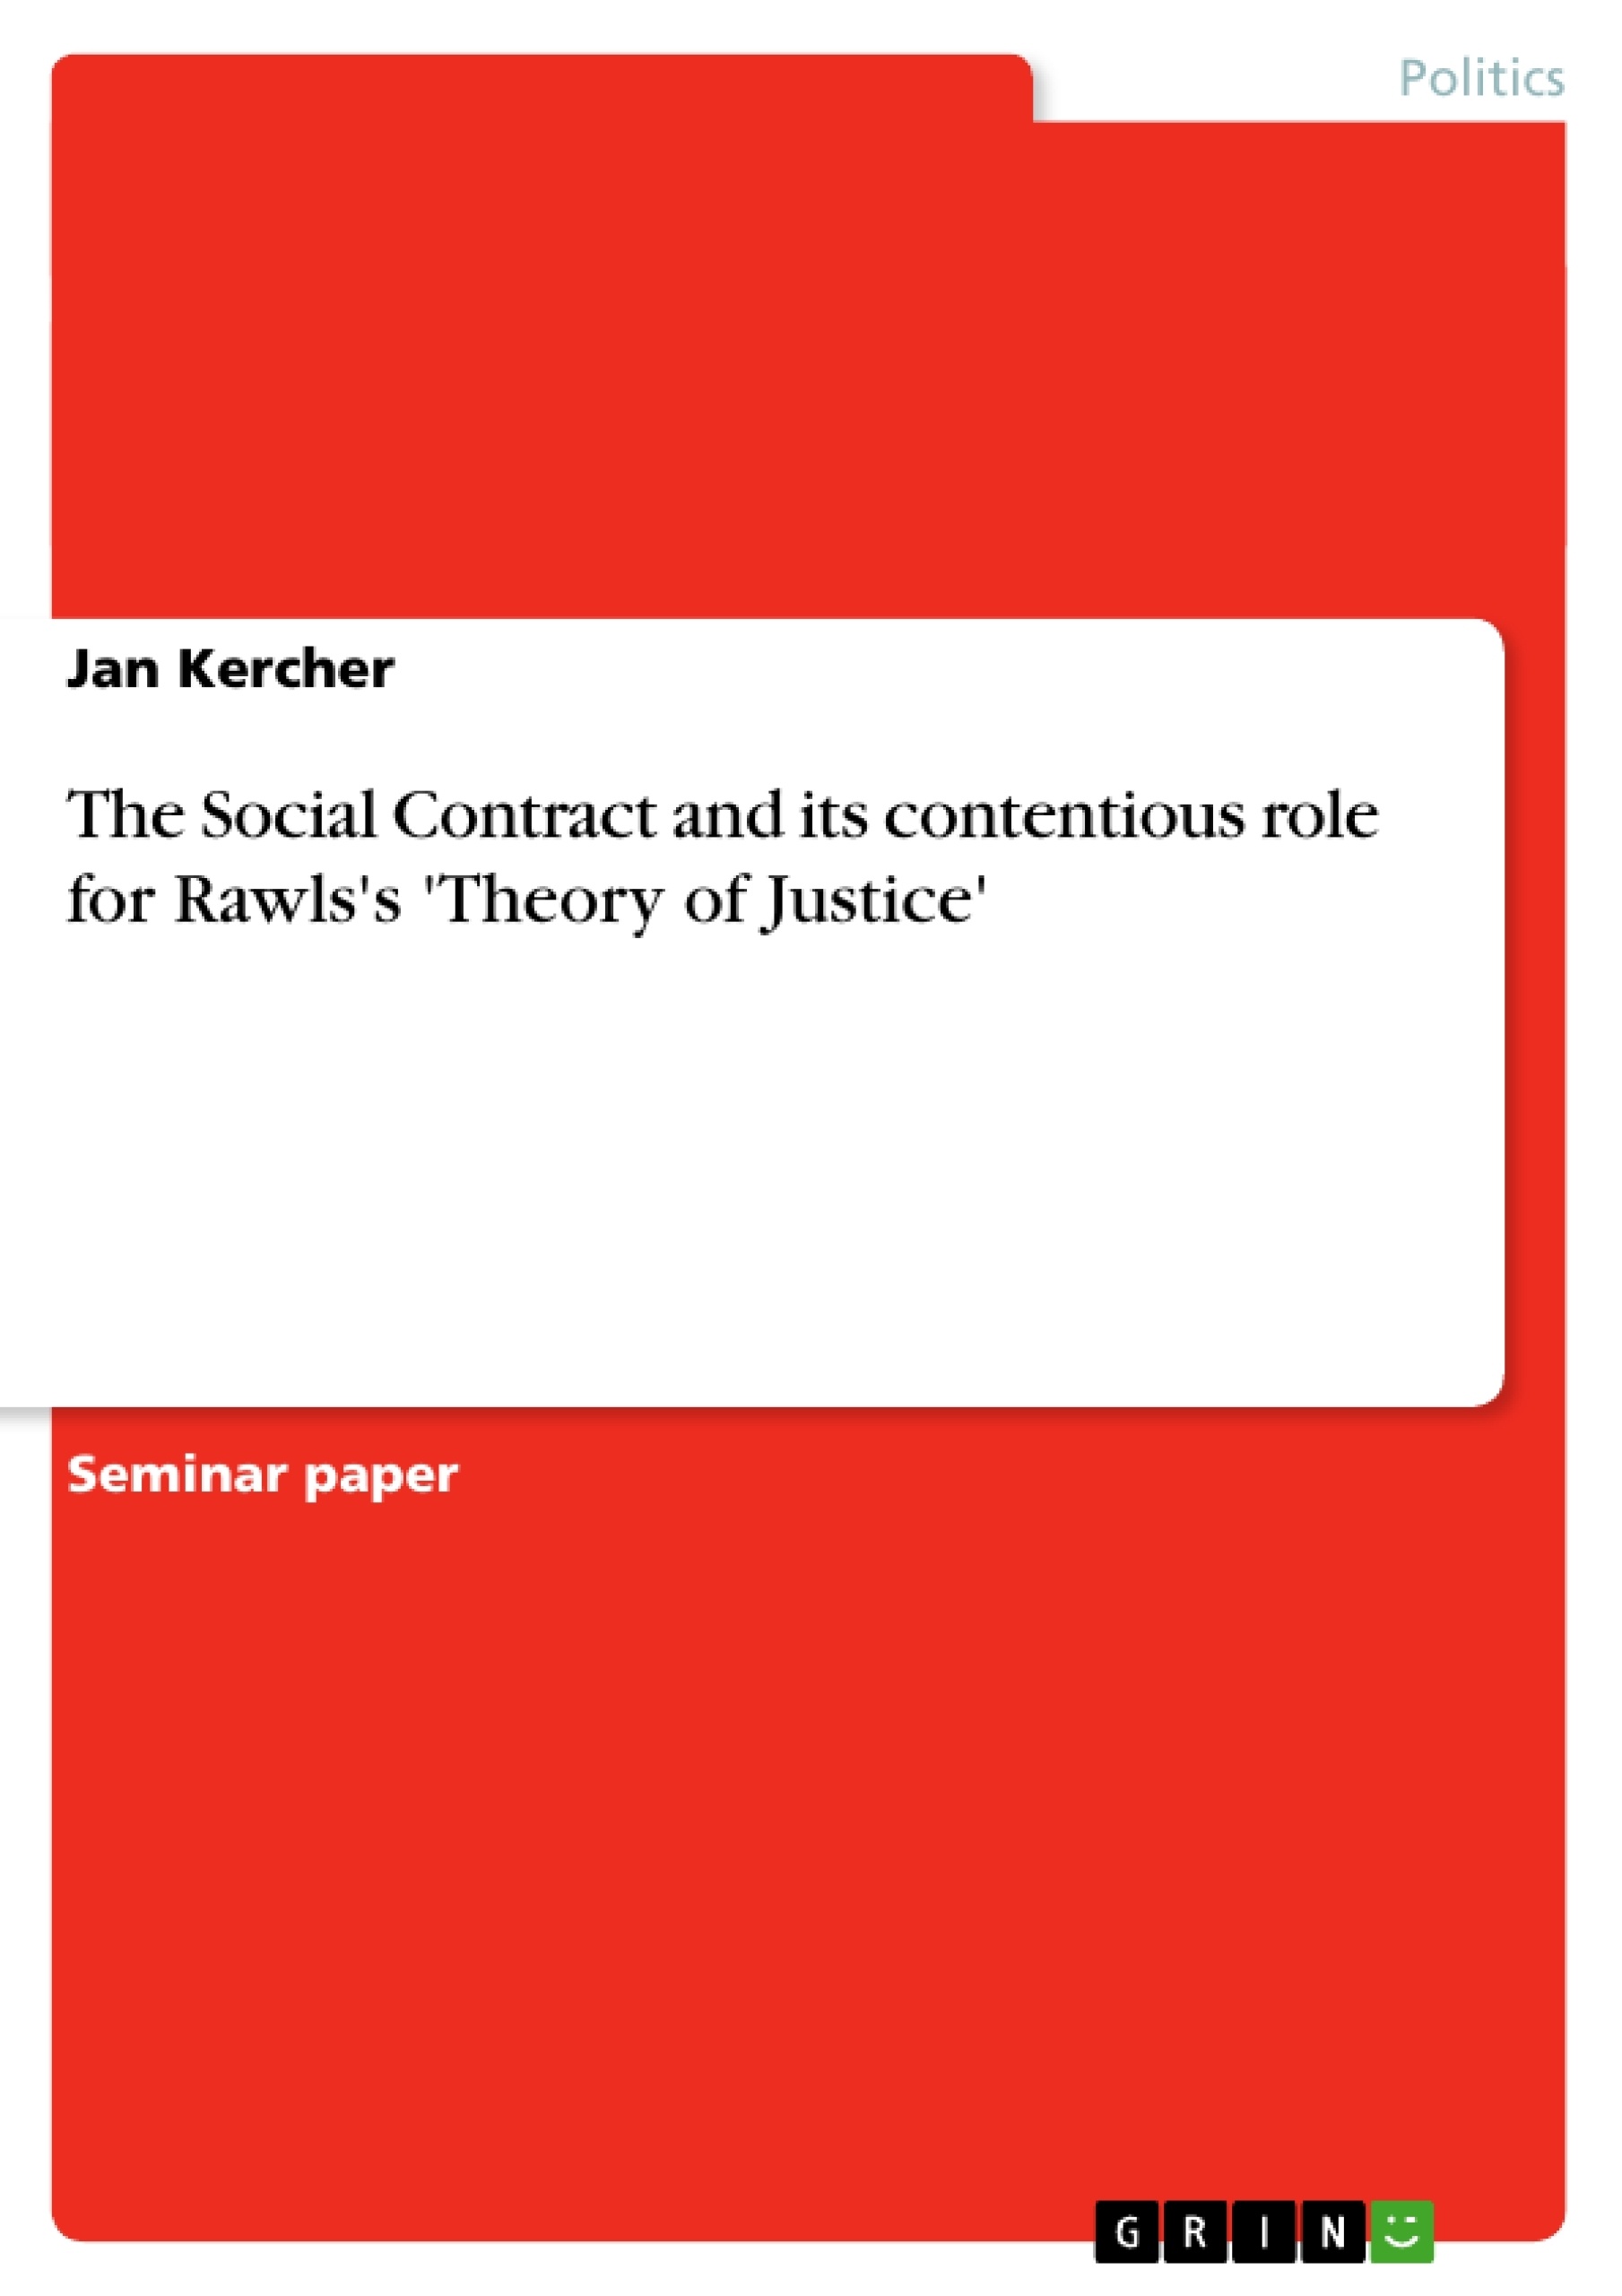 Titre: The Social Contract and its contentious role for Rawls's 'Theory of Justice'